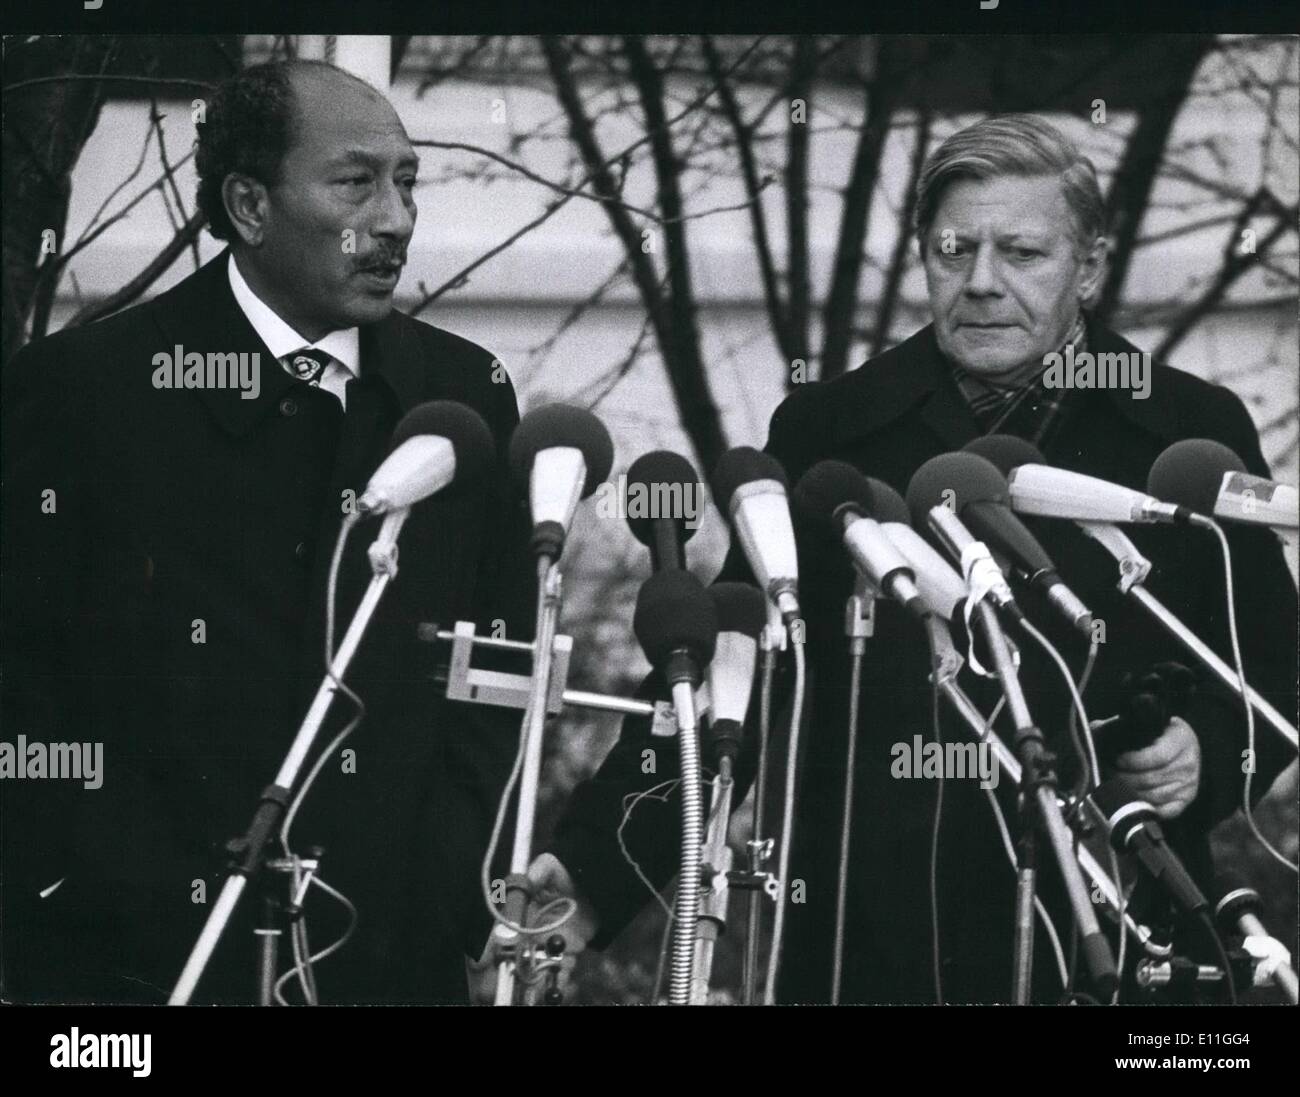 Feb. 02, 1978 - Anwar El Sadat Met Federal Chancellor Helmut Schmidt in Hambug: In Hamburg, on February 9th, 1978 the Egyptian President Anwar El Sadat (1.) had a meeting with the Federal Chancellor Helmut Schmidt (r.) Topic of the conversation were the last events in Near East and questions to the pacific policy between Israel and the Arabian countries. Helmut Schmidt assured Sadat of the support of the EG- countries and the Federal Republic of Germany. After the conversation Sadat flew to Munich and Berchtesgaden (West-Germany), on vacation with his-wife. Stock Photo